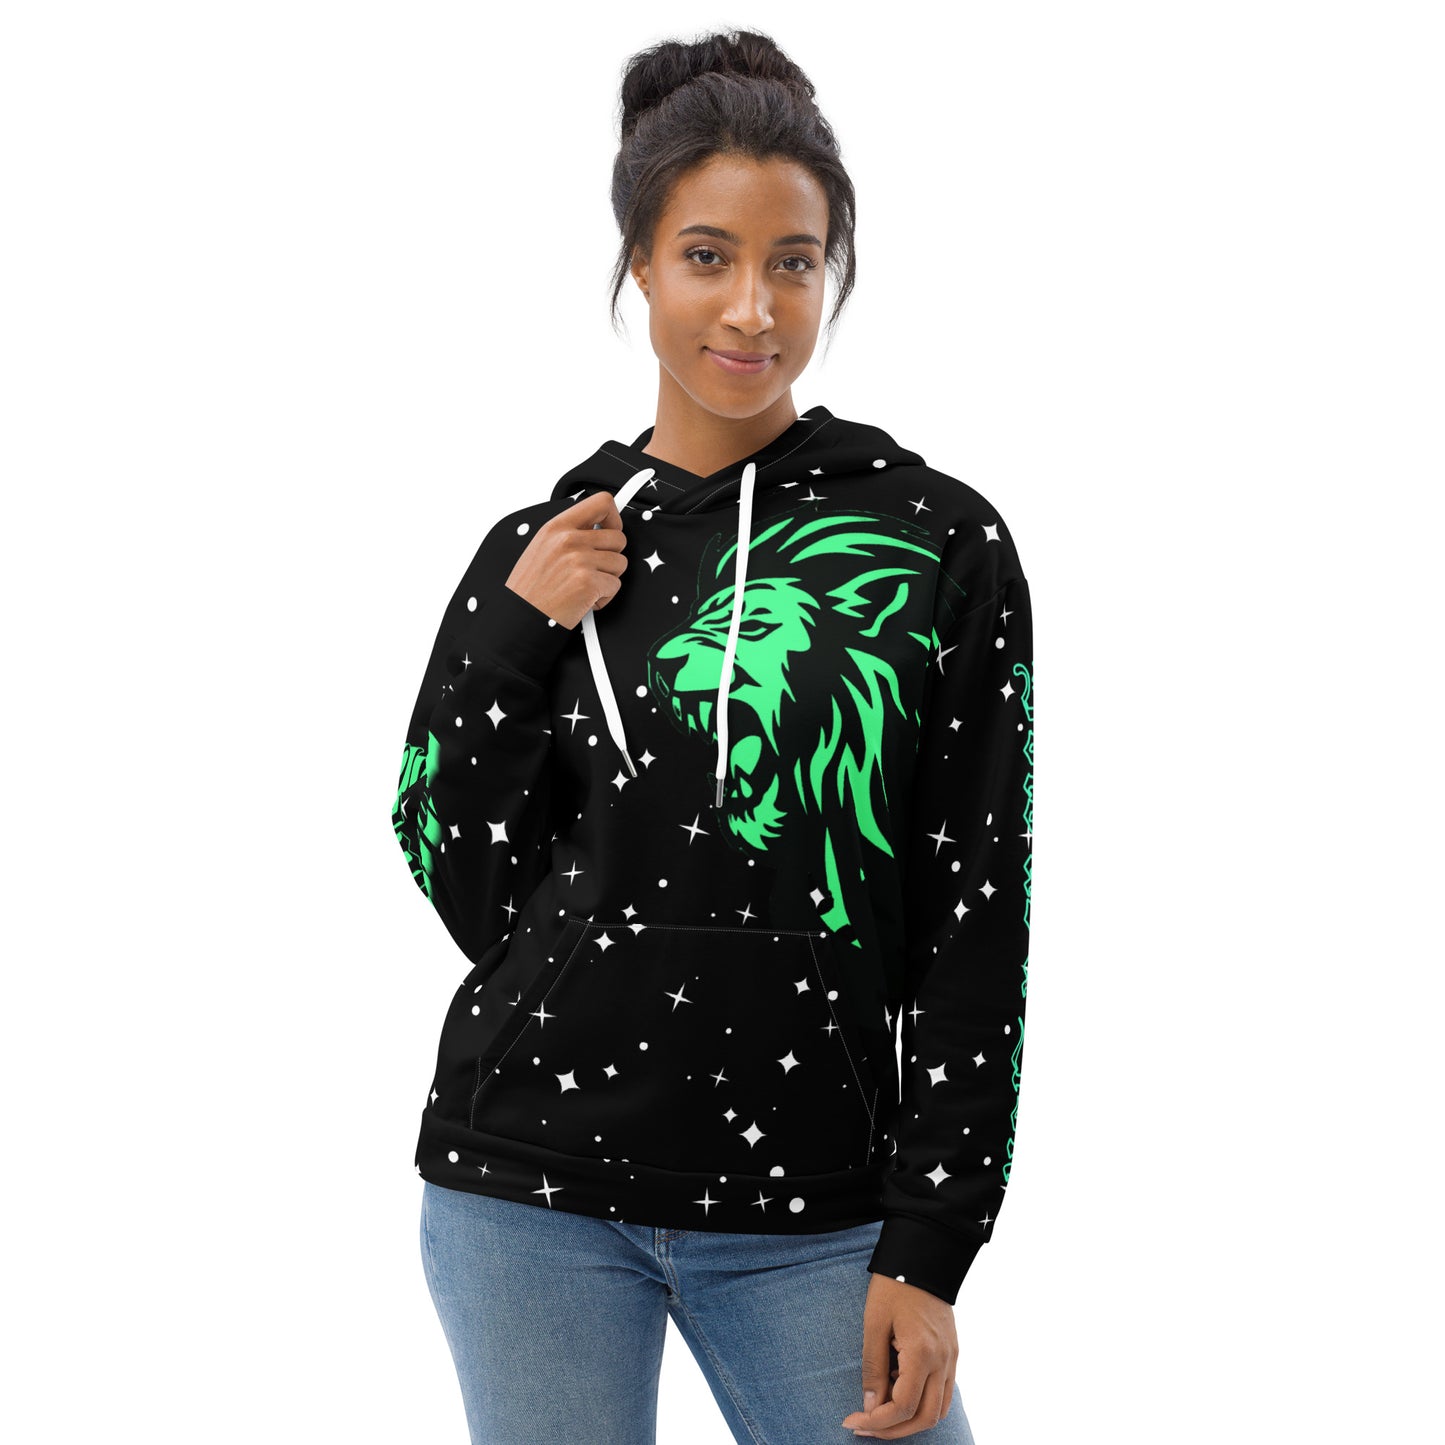 Bold as a Lion- Unisex Hoodie, Free Shipping